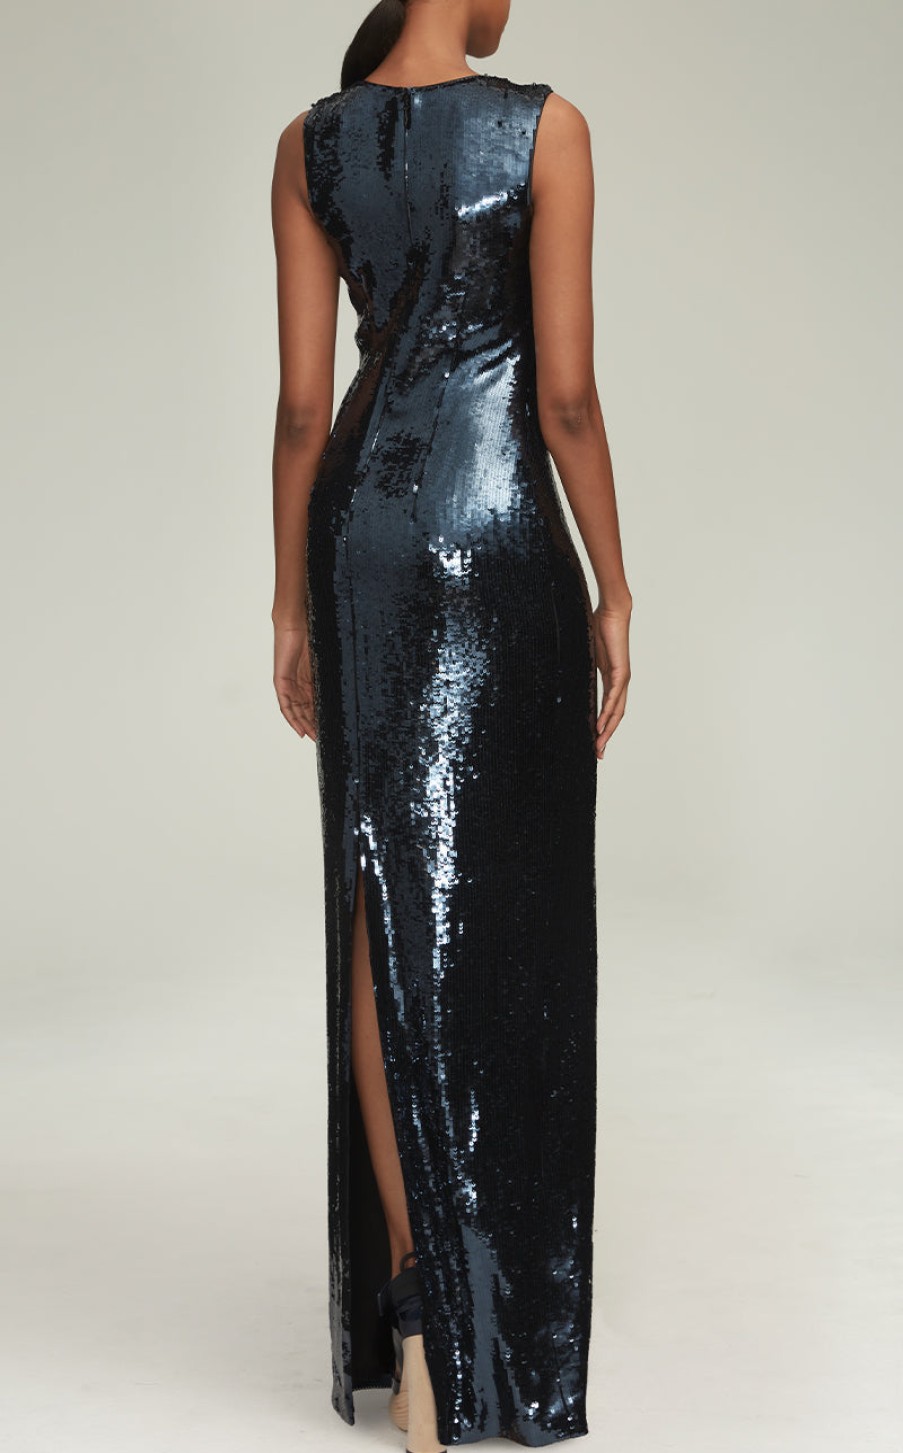 Gowns BRANDON MAXWELL  The Everly Gown In Navy ~ Oscarsally